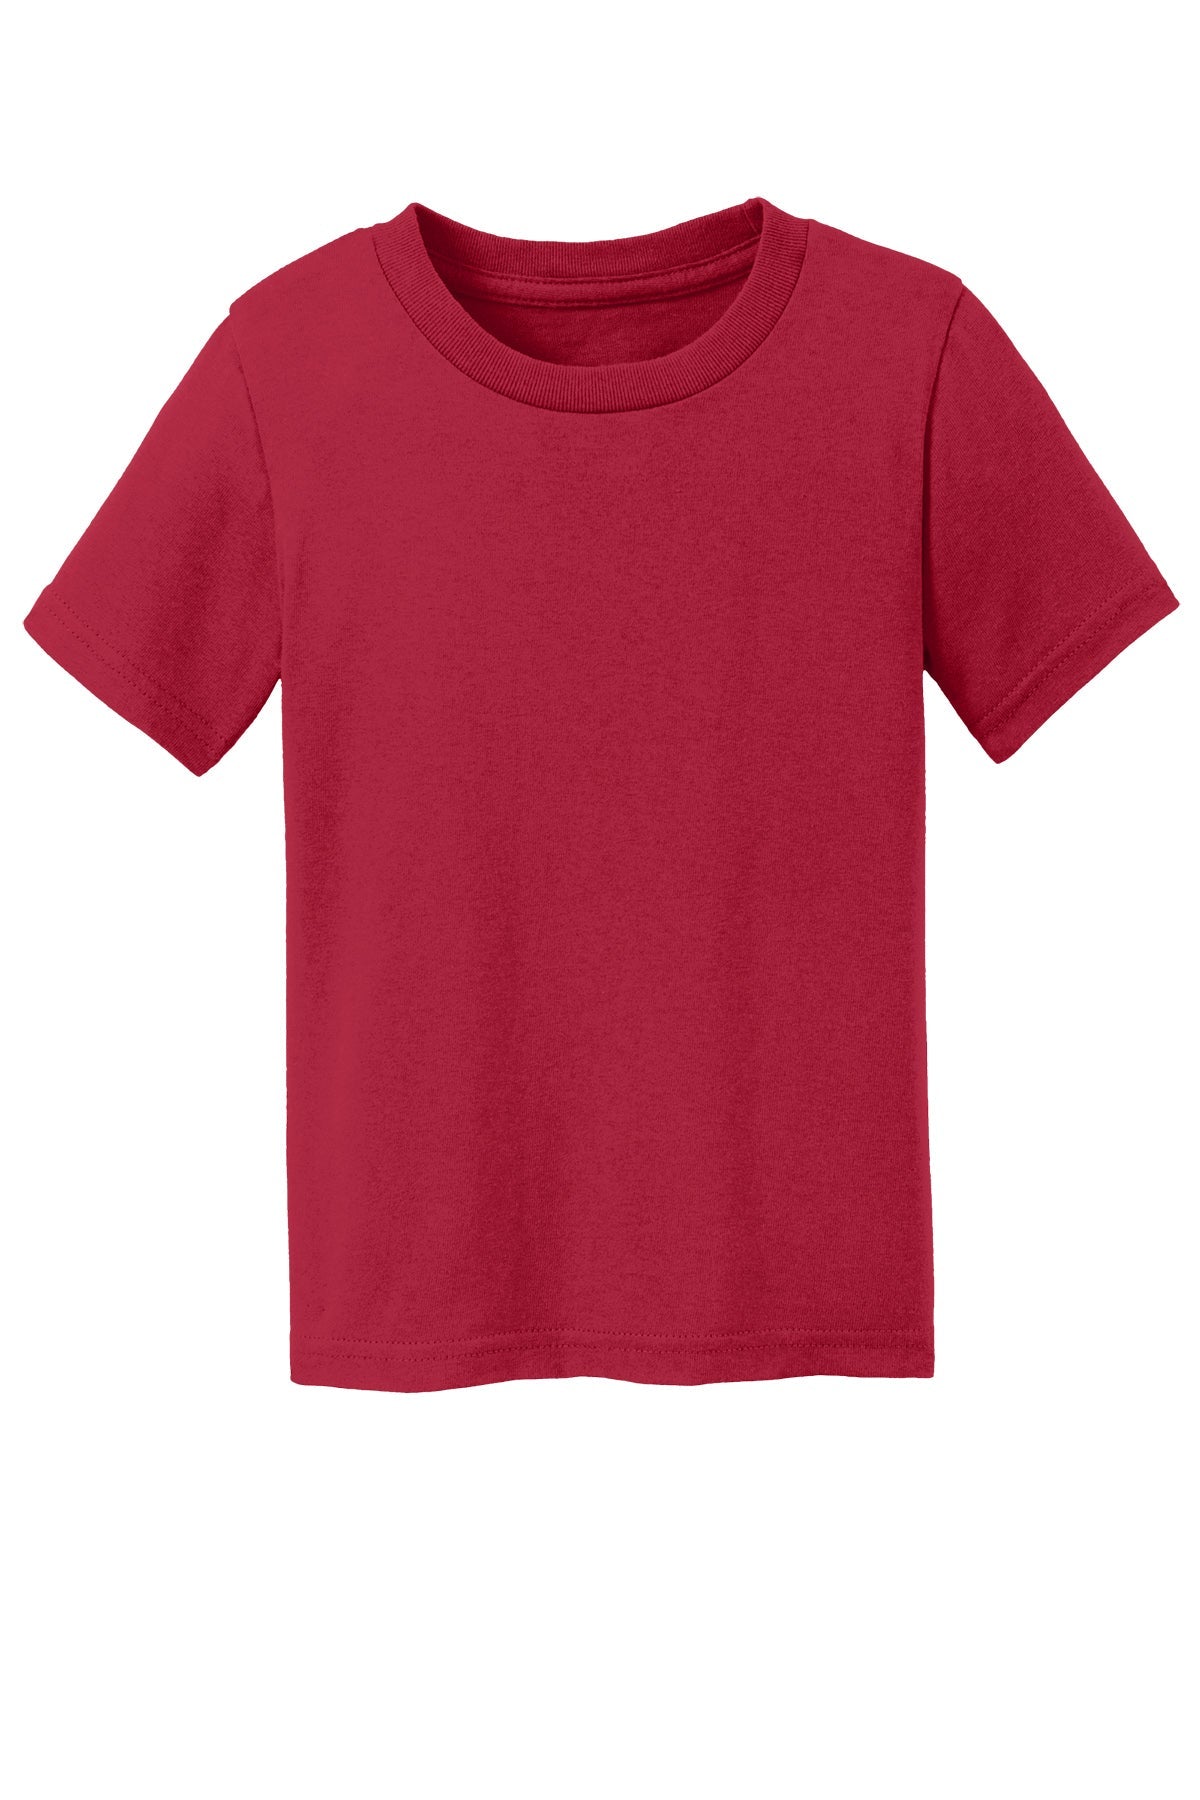 Port & Co Car54T Toddler T-Shirt 2T / Red